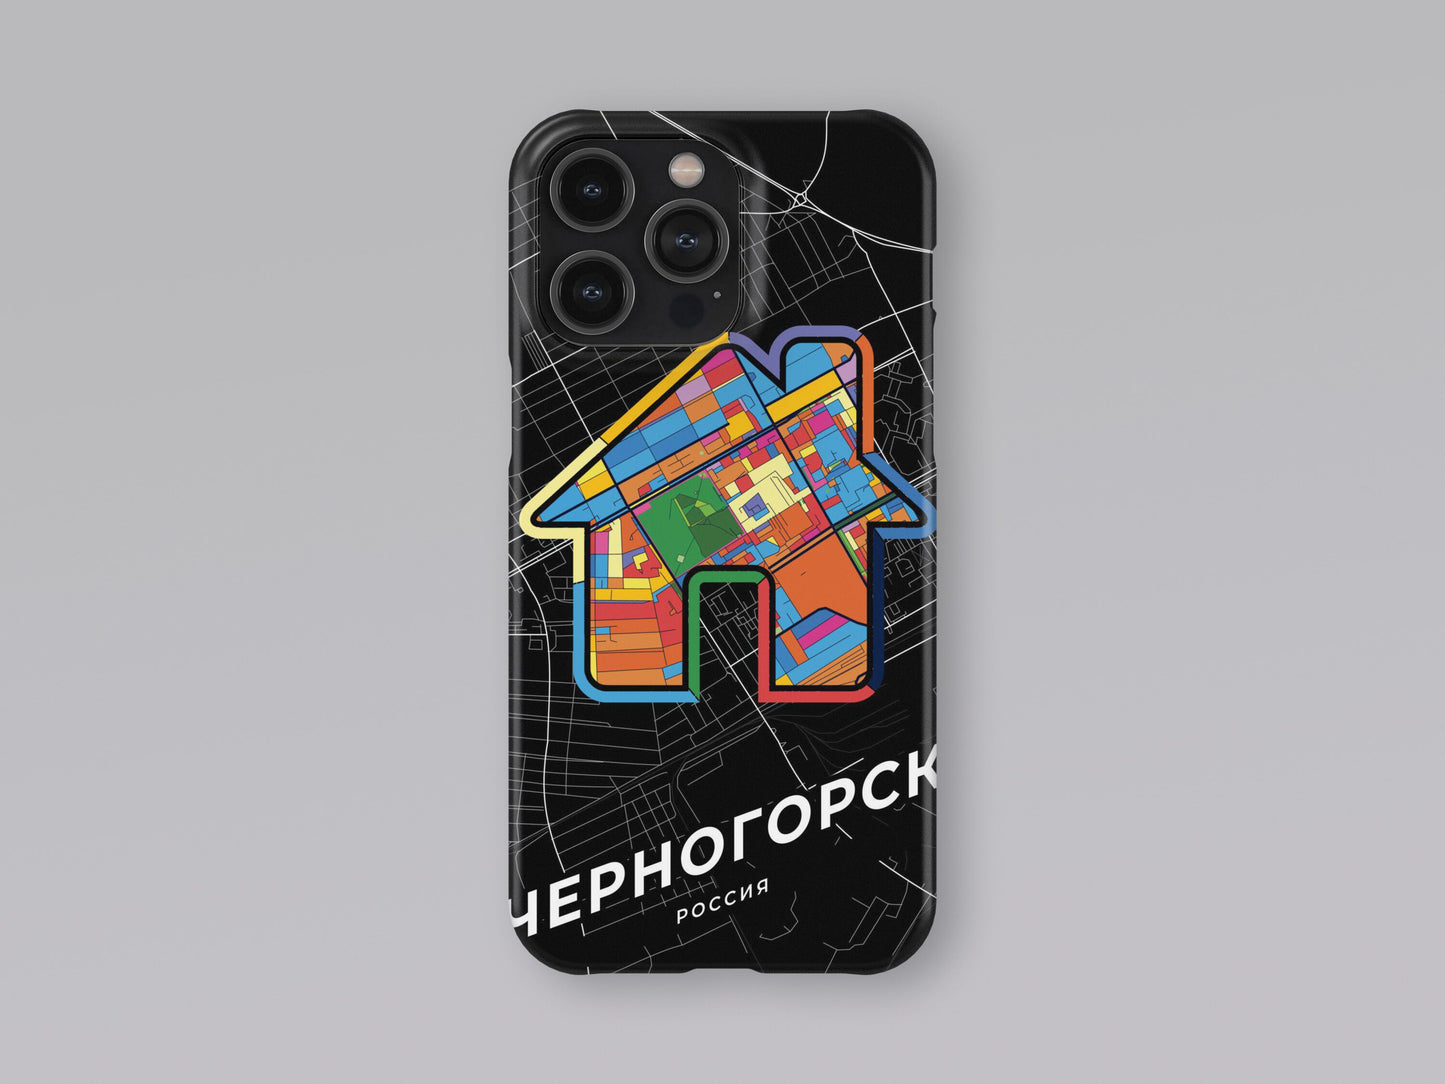 Chernogorsk Russia slim phone case with colorful icon. Birthday, wedding or housewarming gift. Couple match cases. 3